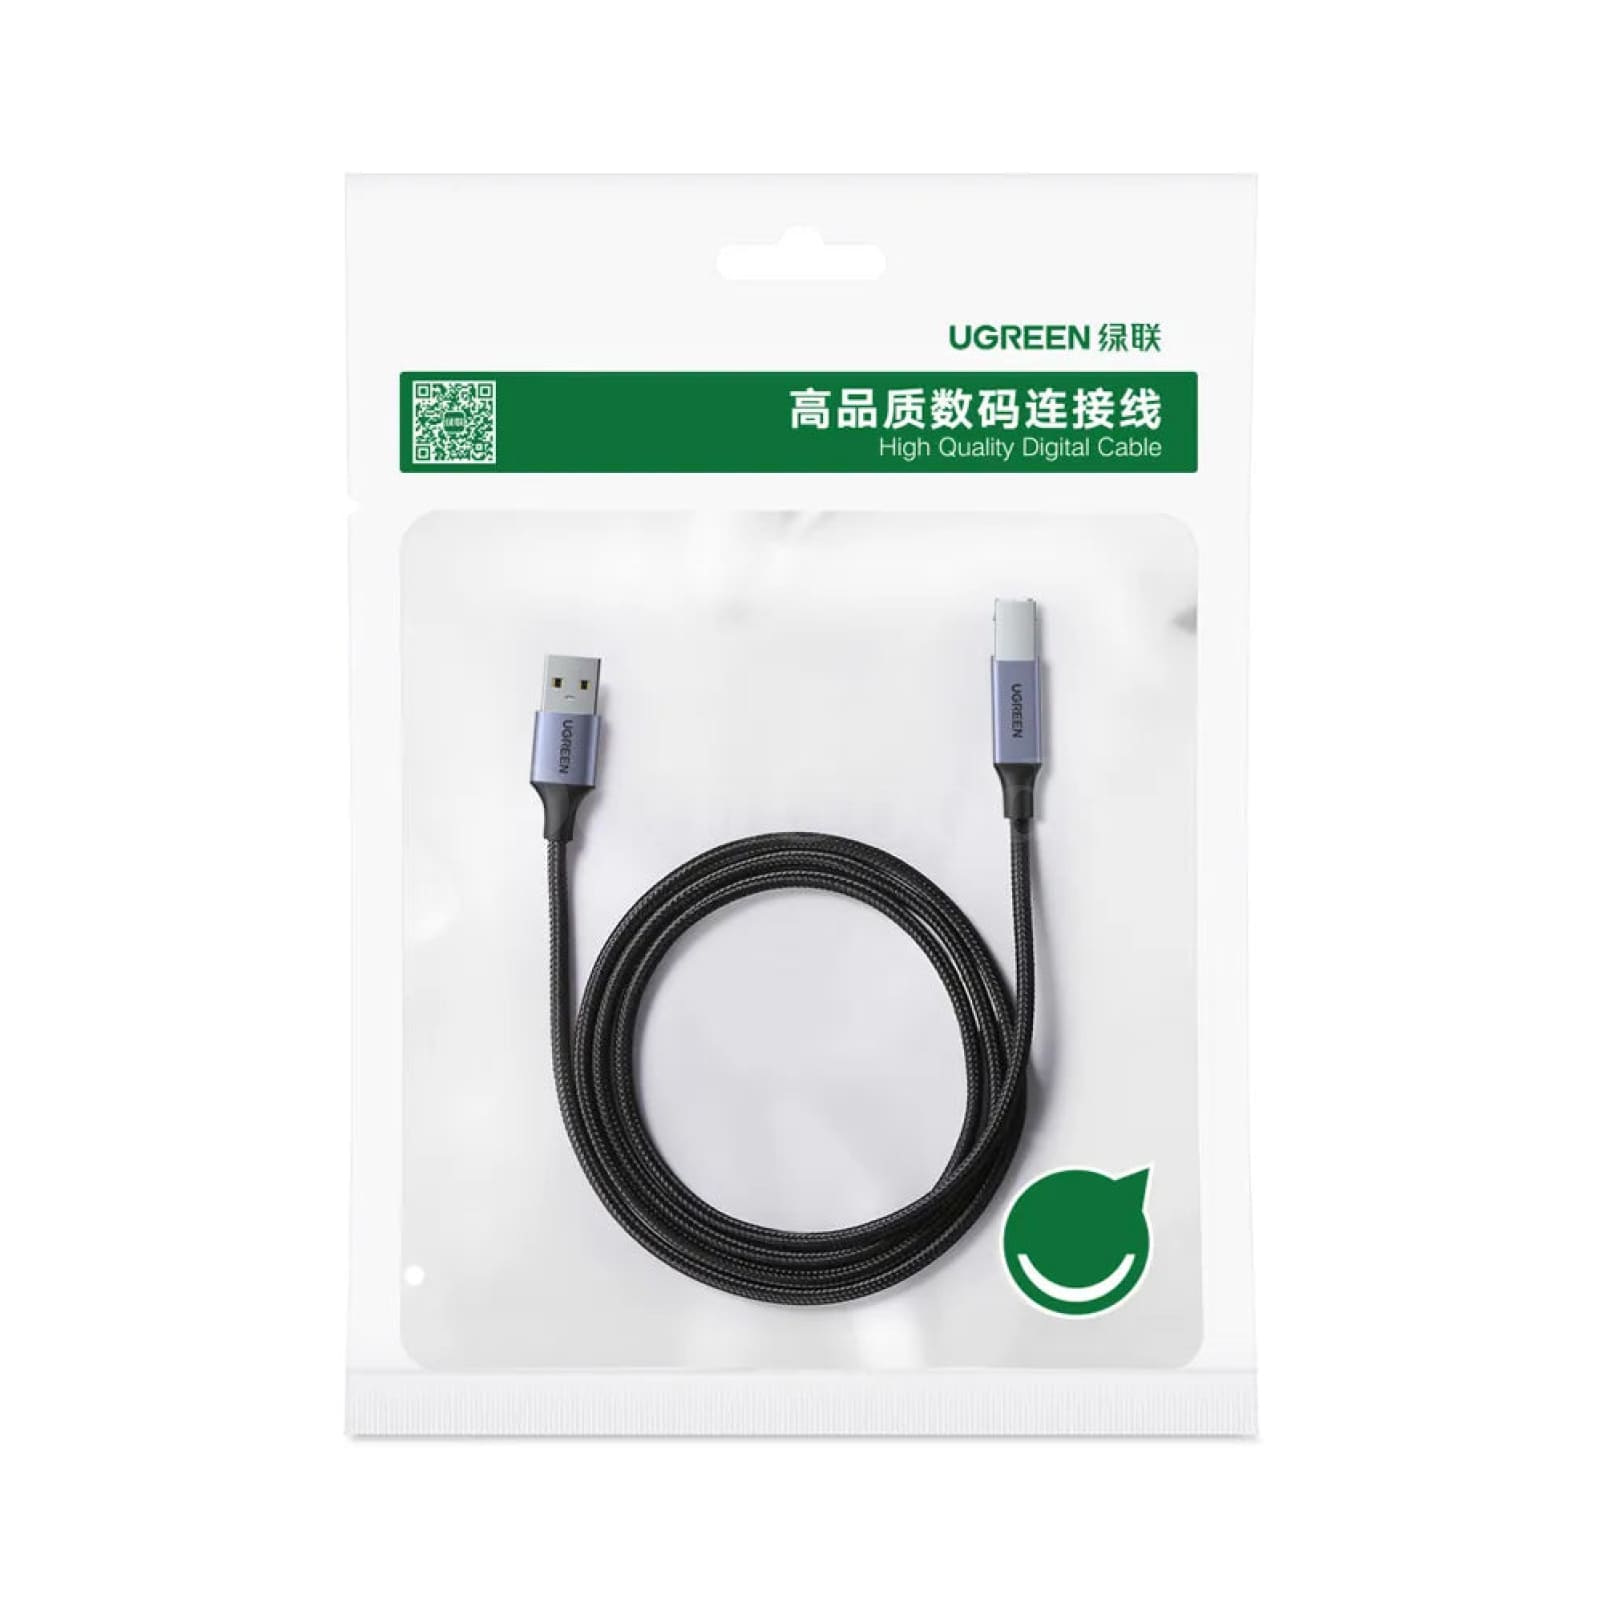 Ugreen Usb Printer Cable Type B Male To A 3.0 2.0 For Canon Epson Hp Zjiang Label 301635